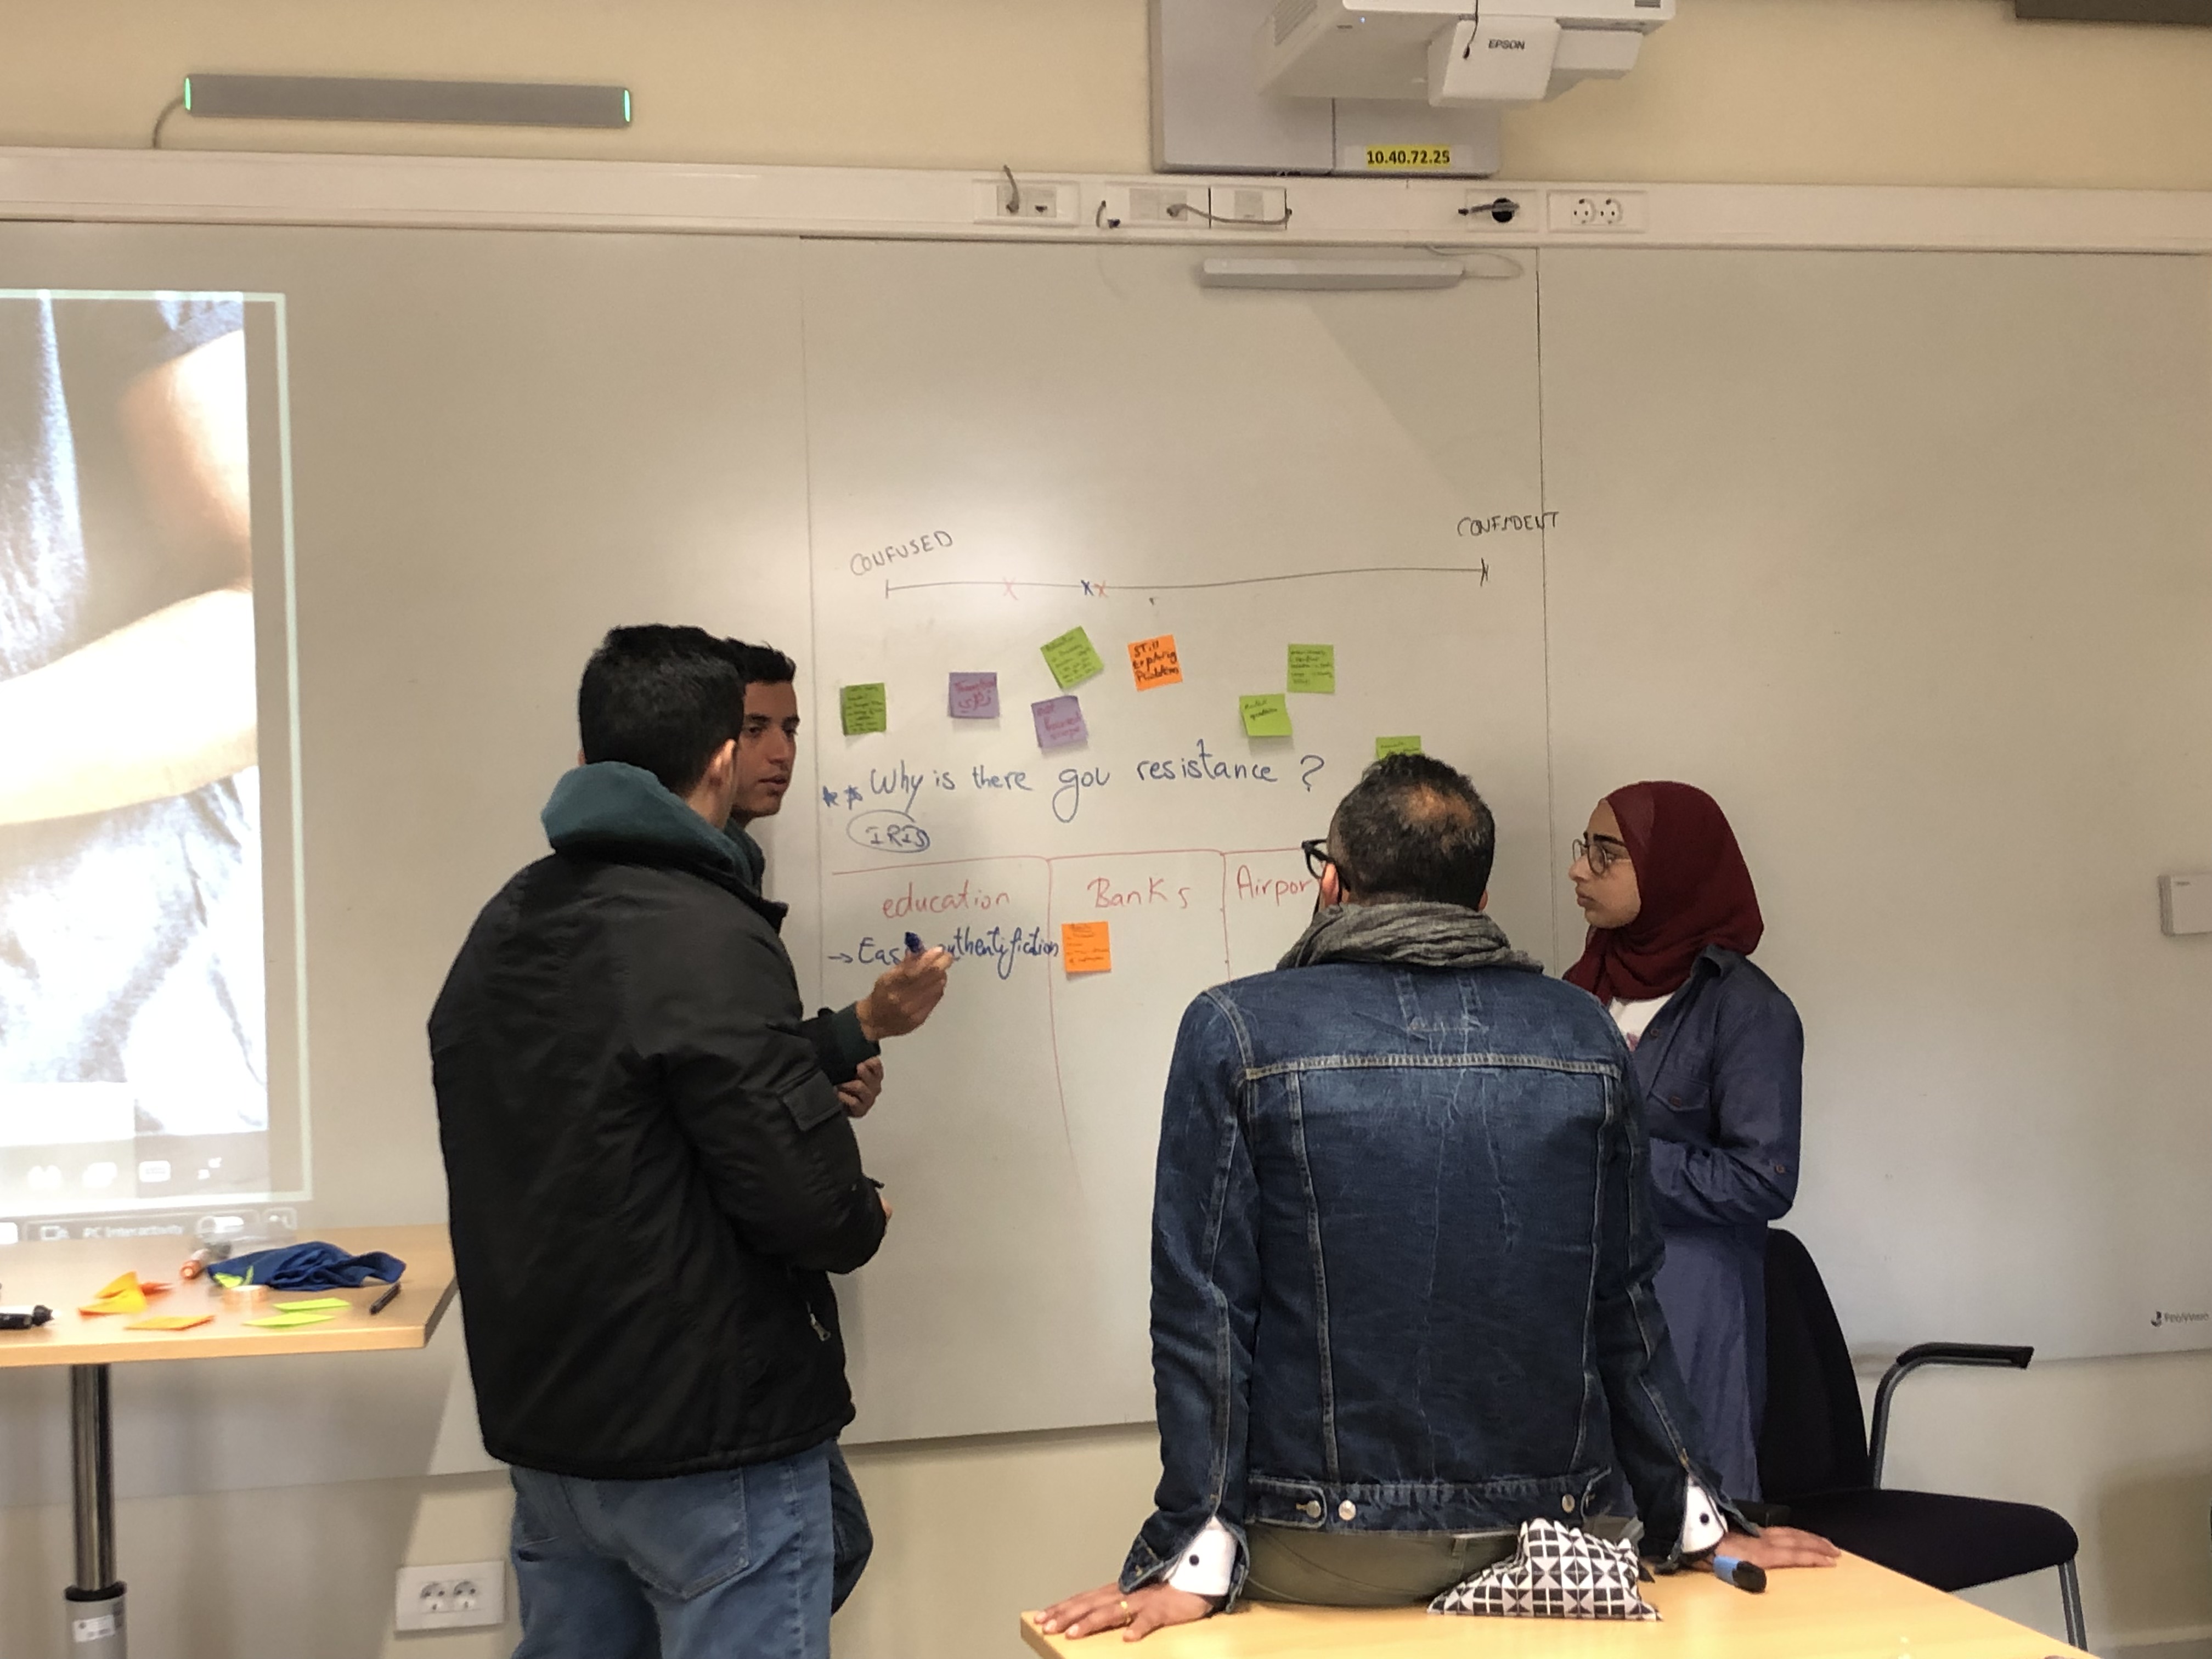 The Fusion team uses design thinking in their project